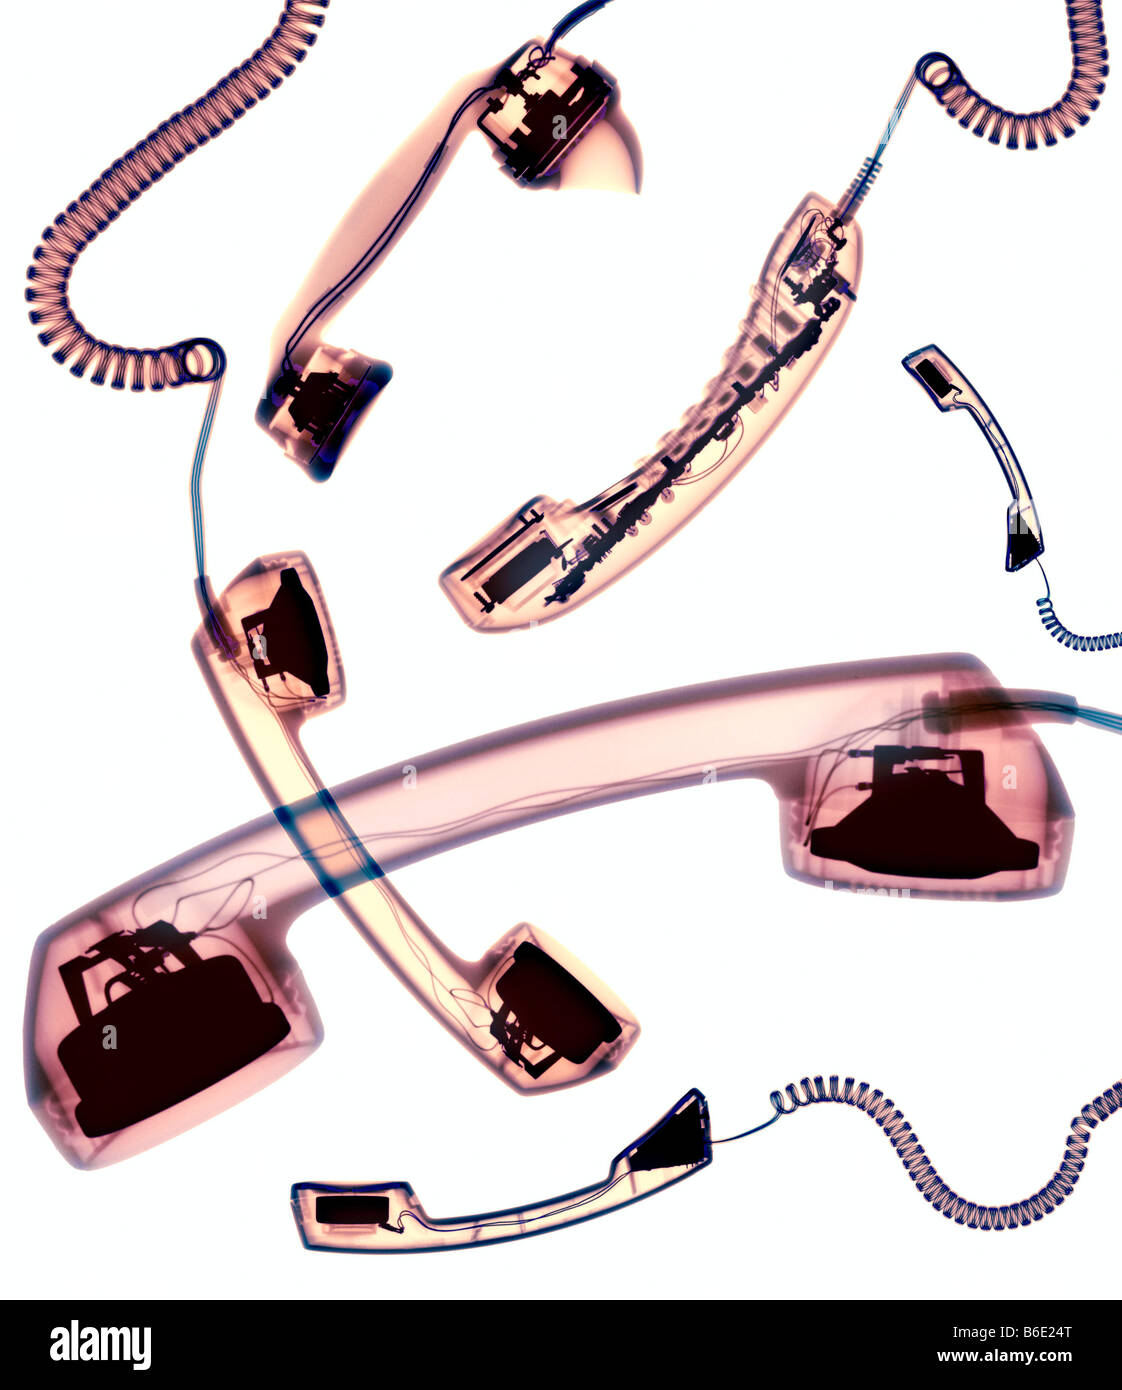 Coloured X-ray of telephone handsets Stock Photo